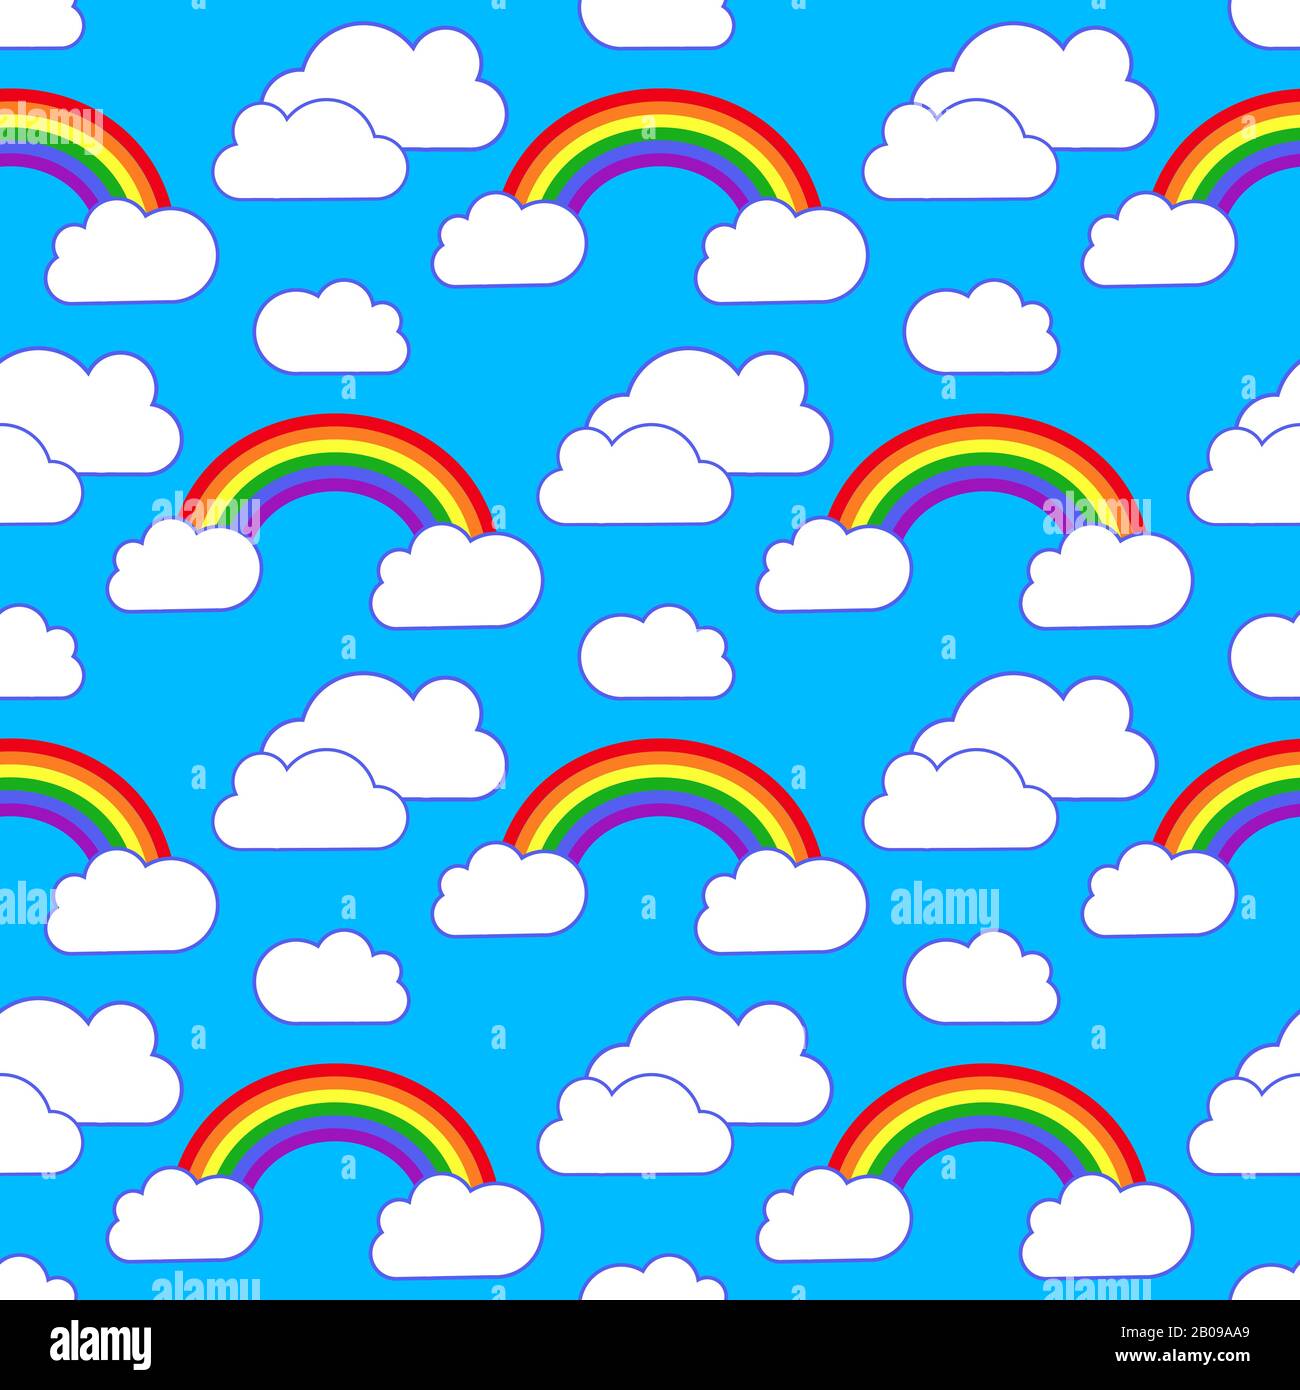 Rainbow and clouds in sky seamless pattern background. Vector illustration Stock Vector